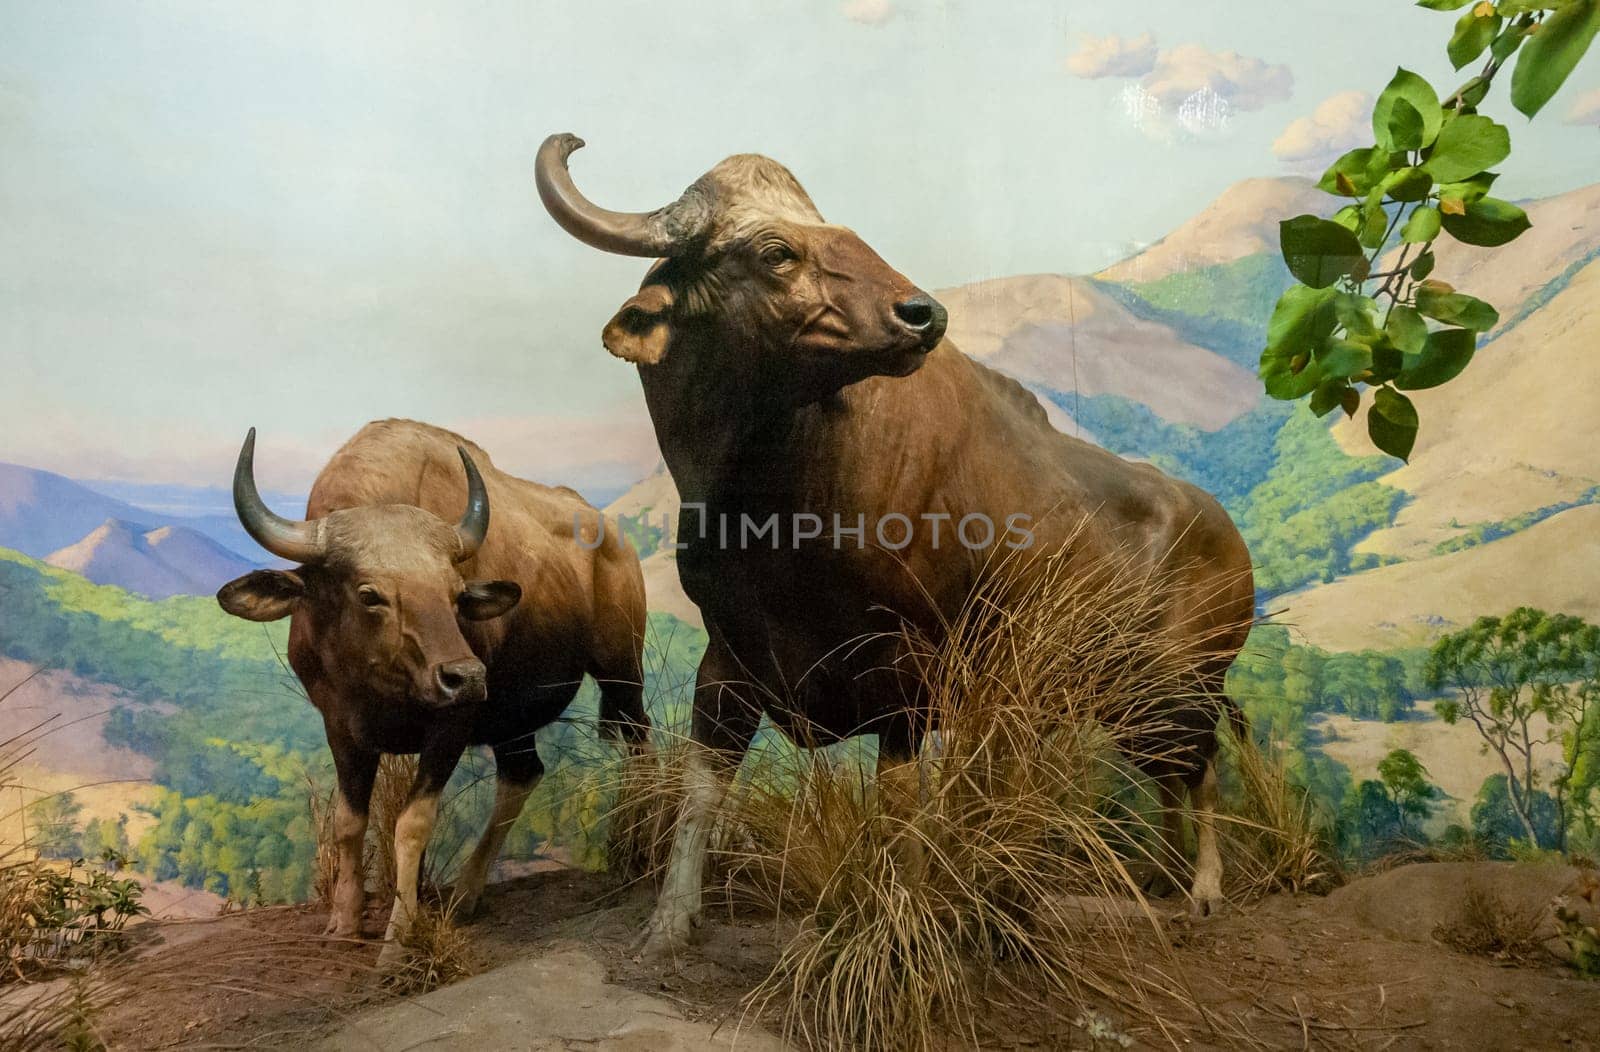 NEW YORK, USA - DECEMBER 05, 2011: A stuffed buffalo with horns on display at the Museum of National History, USA by Hydrobiolog